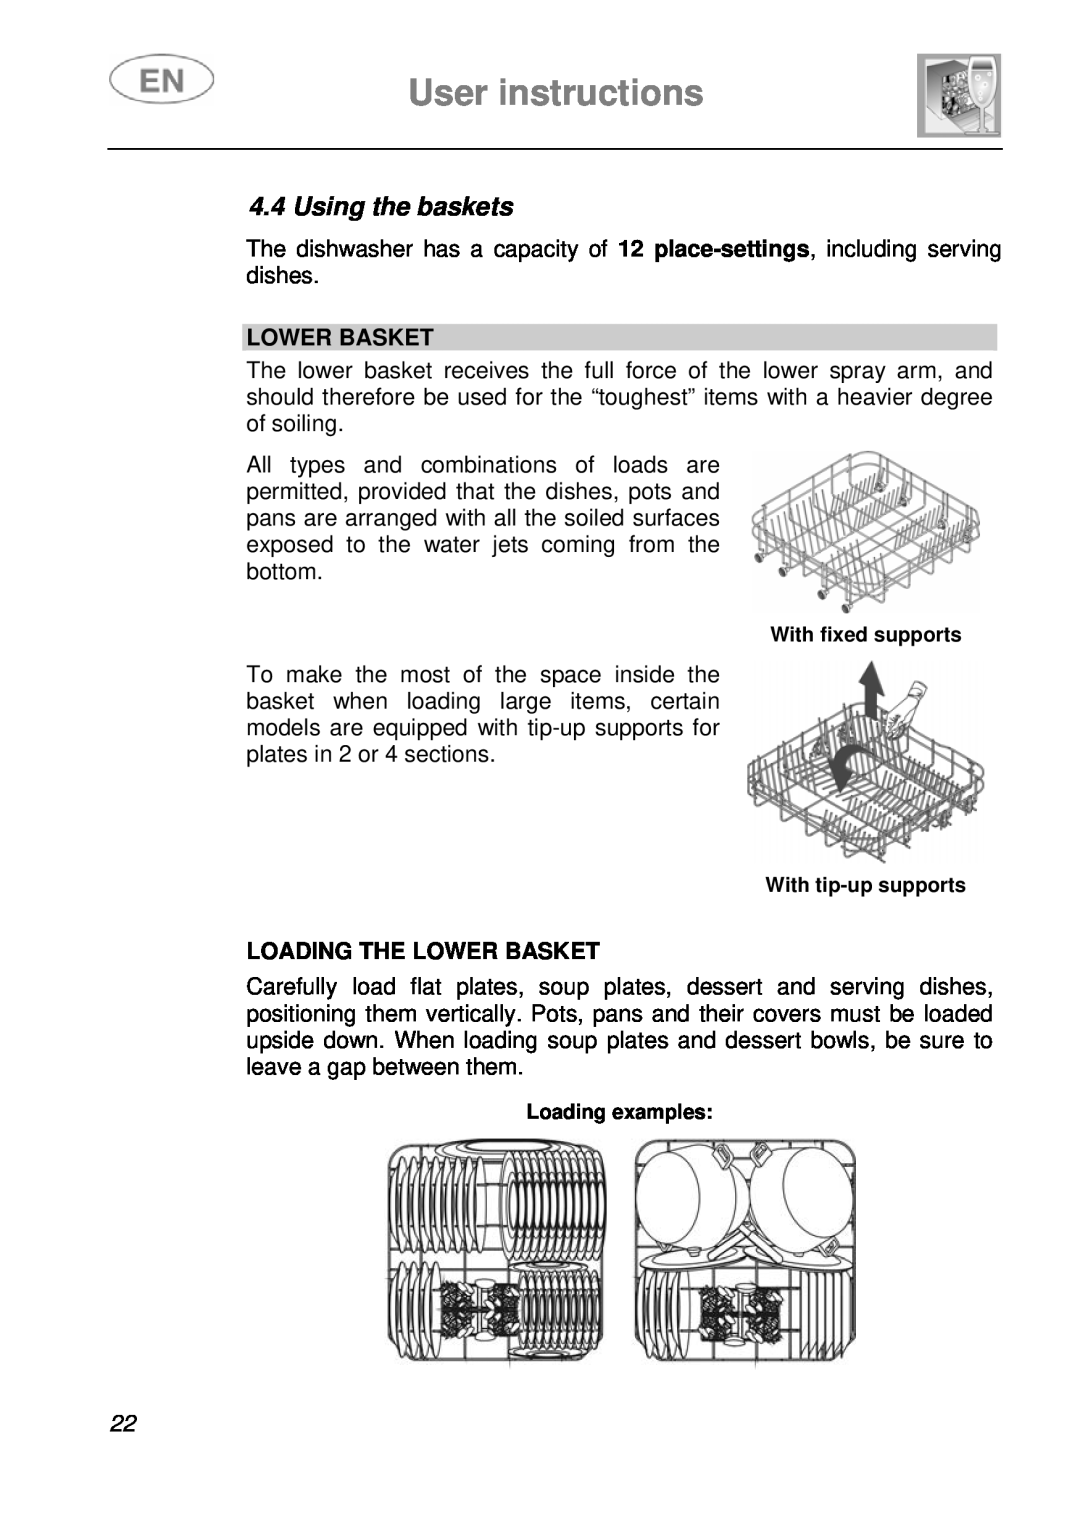 Smeg STA6249, STA6248 instruction manual User instructions, Using the baskets, Loading The Lower Basket 